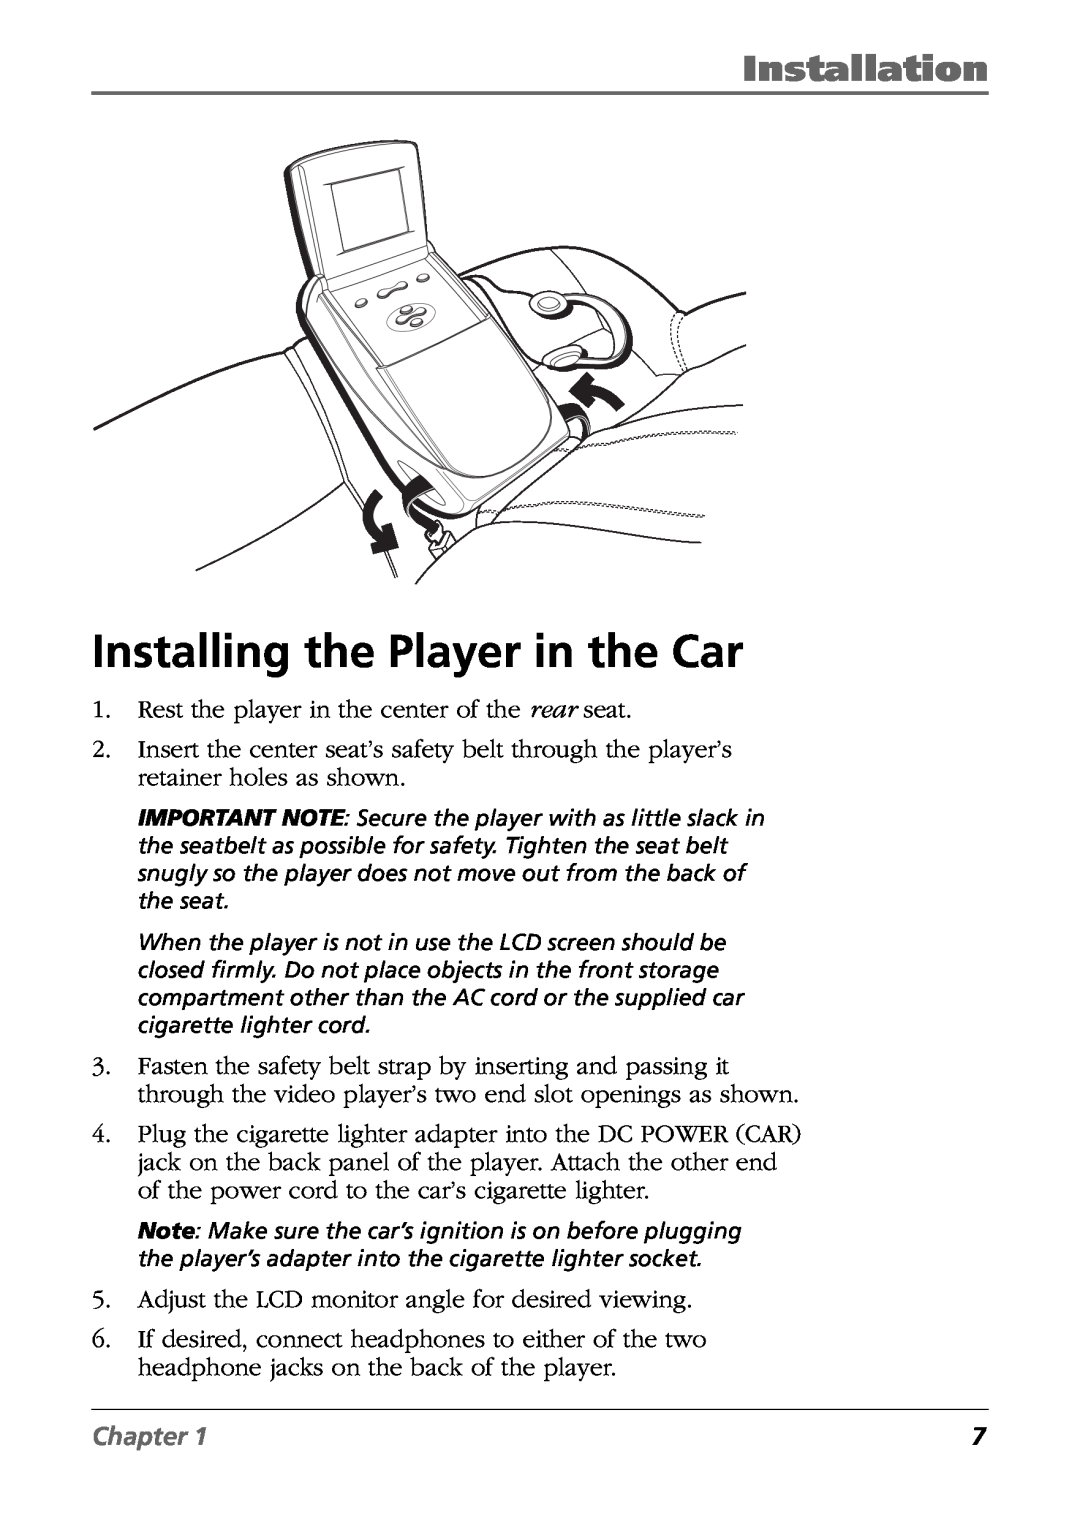 RCA Mobile Video Cassette Player manual Installing the Player in the Car, Installation, Chapter 